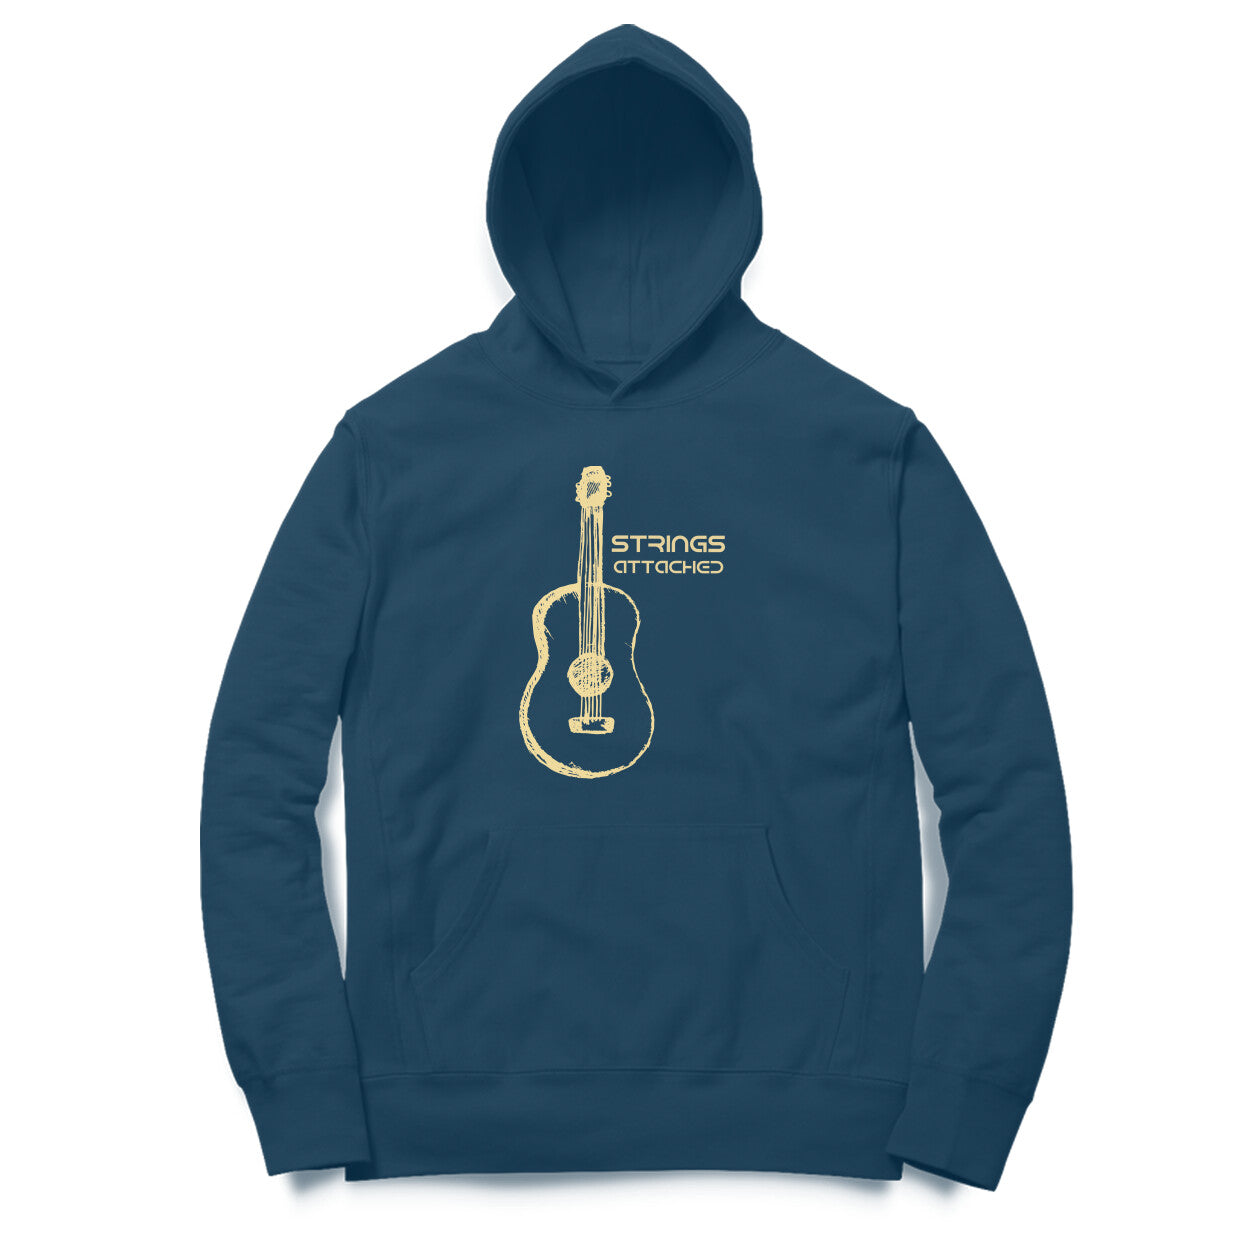 TNH - Unisex Hoodies - Strings Attached